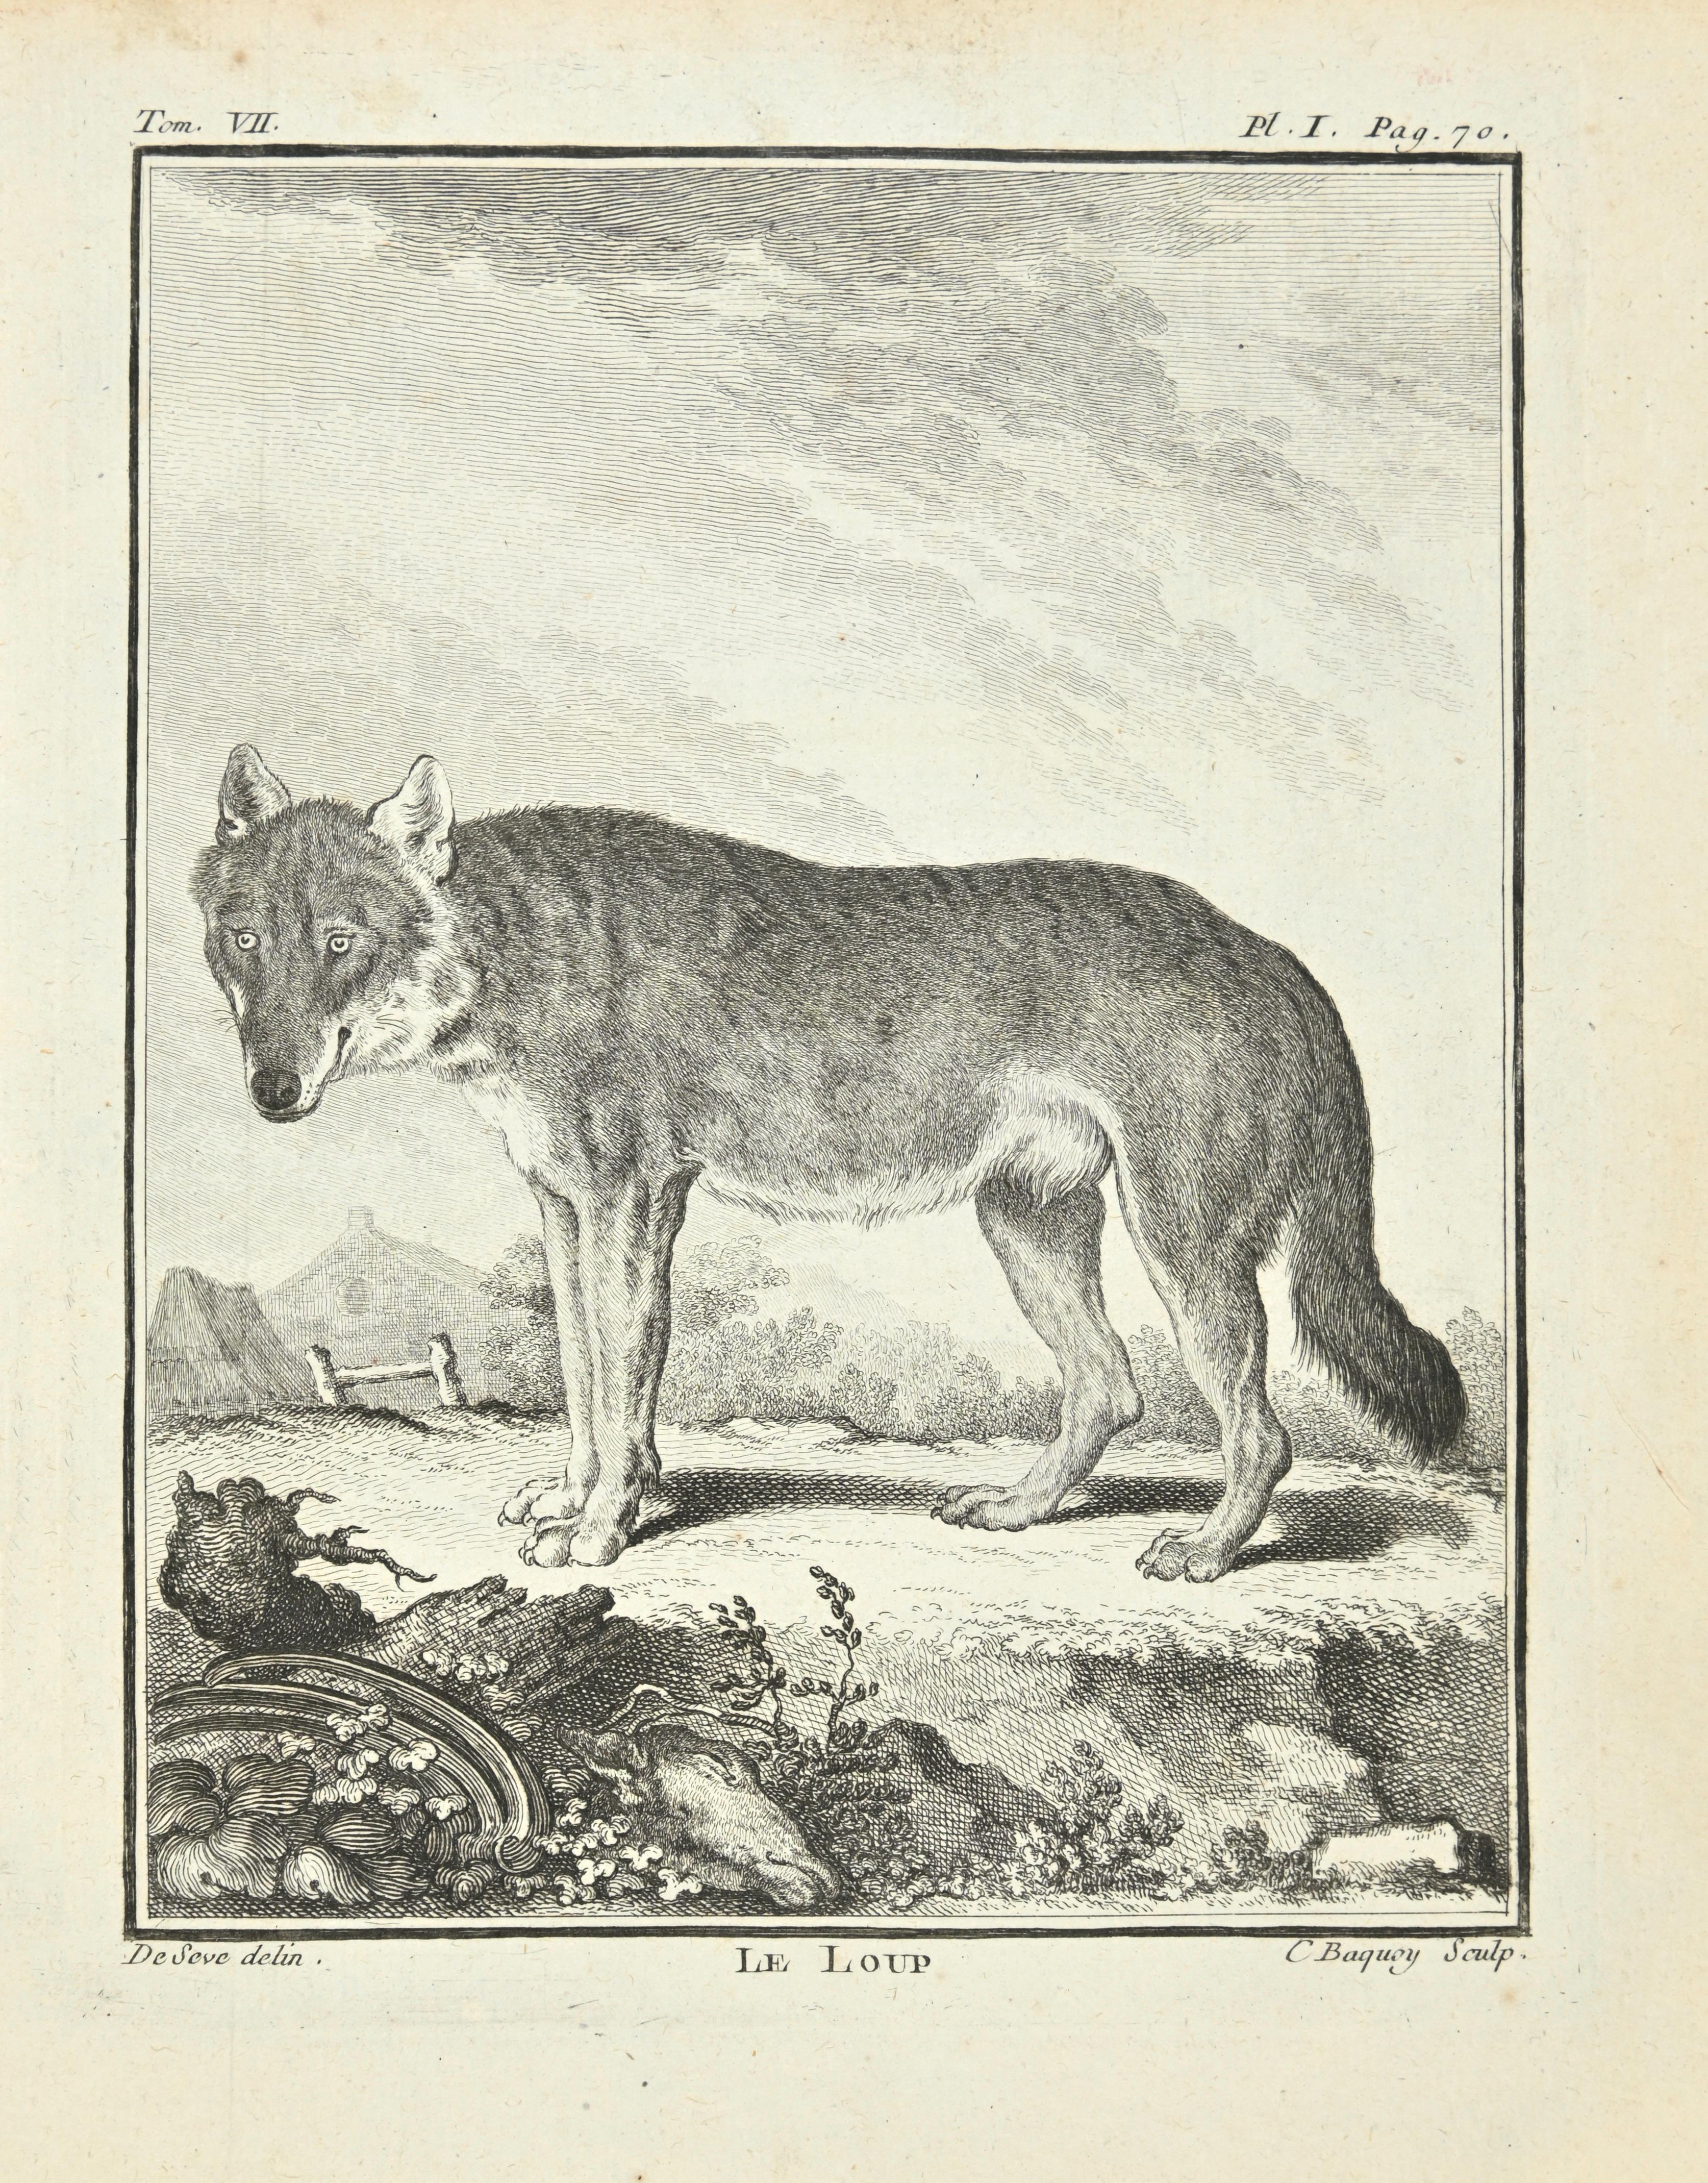 Le Loup is an etching realized by Jean Charles Baquoy in 1771.

It belongs to the suite "Histoire Naturelle de Buffon".

The Artist's signature is engraved lower right.

Good conditions.